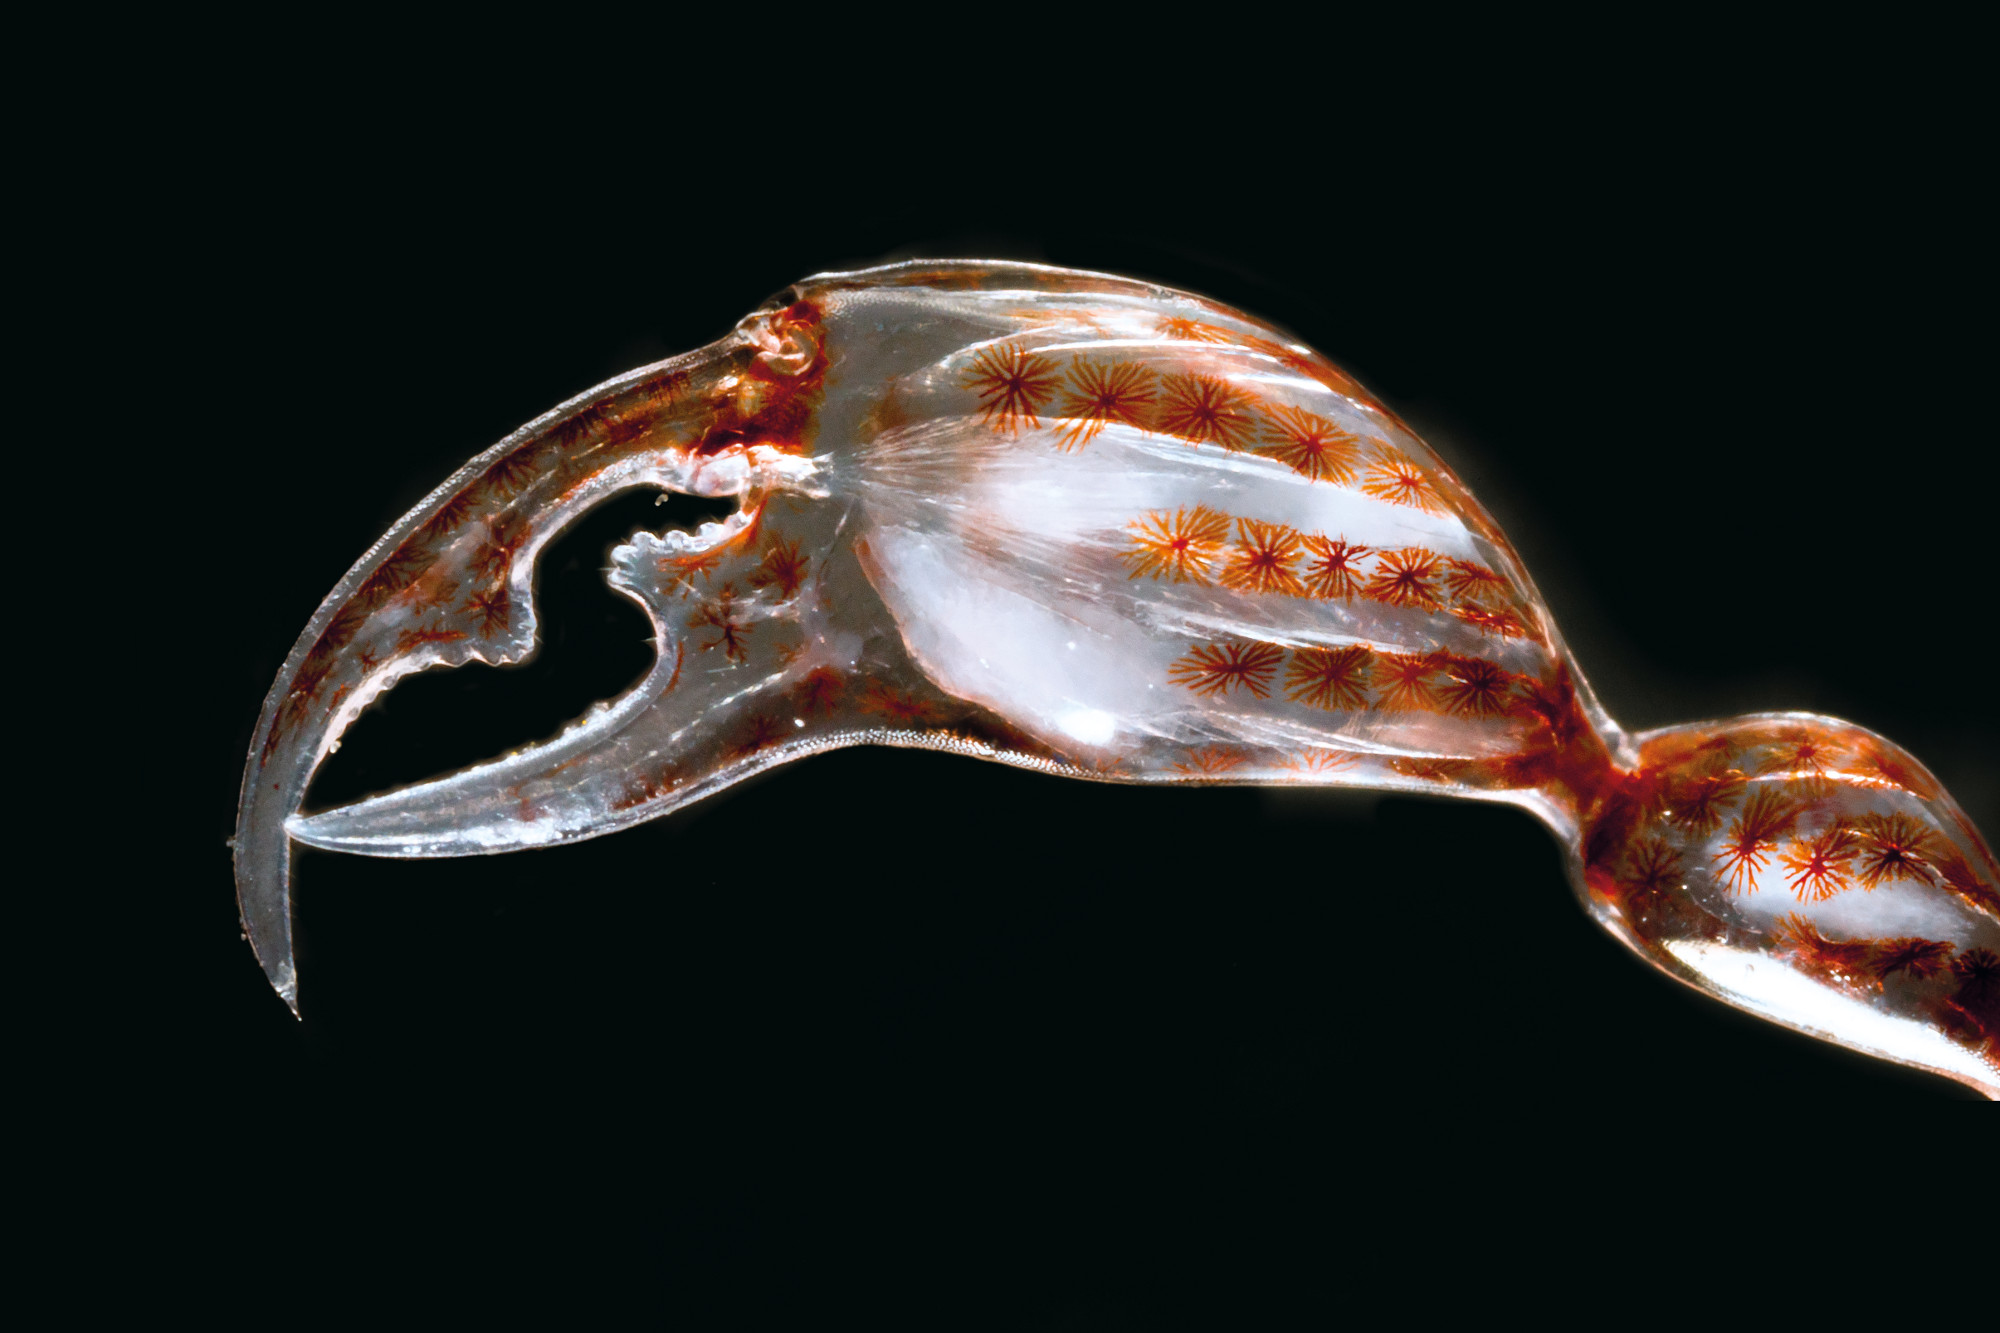 “Claws and Camouflage,” by Christian Sardet and Sharif Mirshak, CNRS. Phronima has four legs (two front and two hind legs), two large claws, and a tail for swimming with the currents. Here, its claw is colored a copper-red from pigmented cells called chromatophores. It can contract the cells and appear completely transparent so that prey mistakes it for harmless gelatinous plankton. Image courtesy of Tara Oceans, "Plankton: Wonders of the Drifting World"